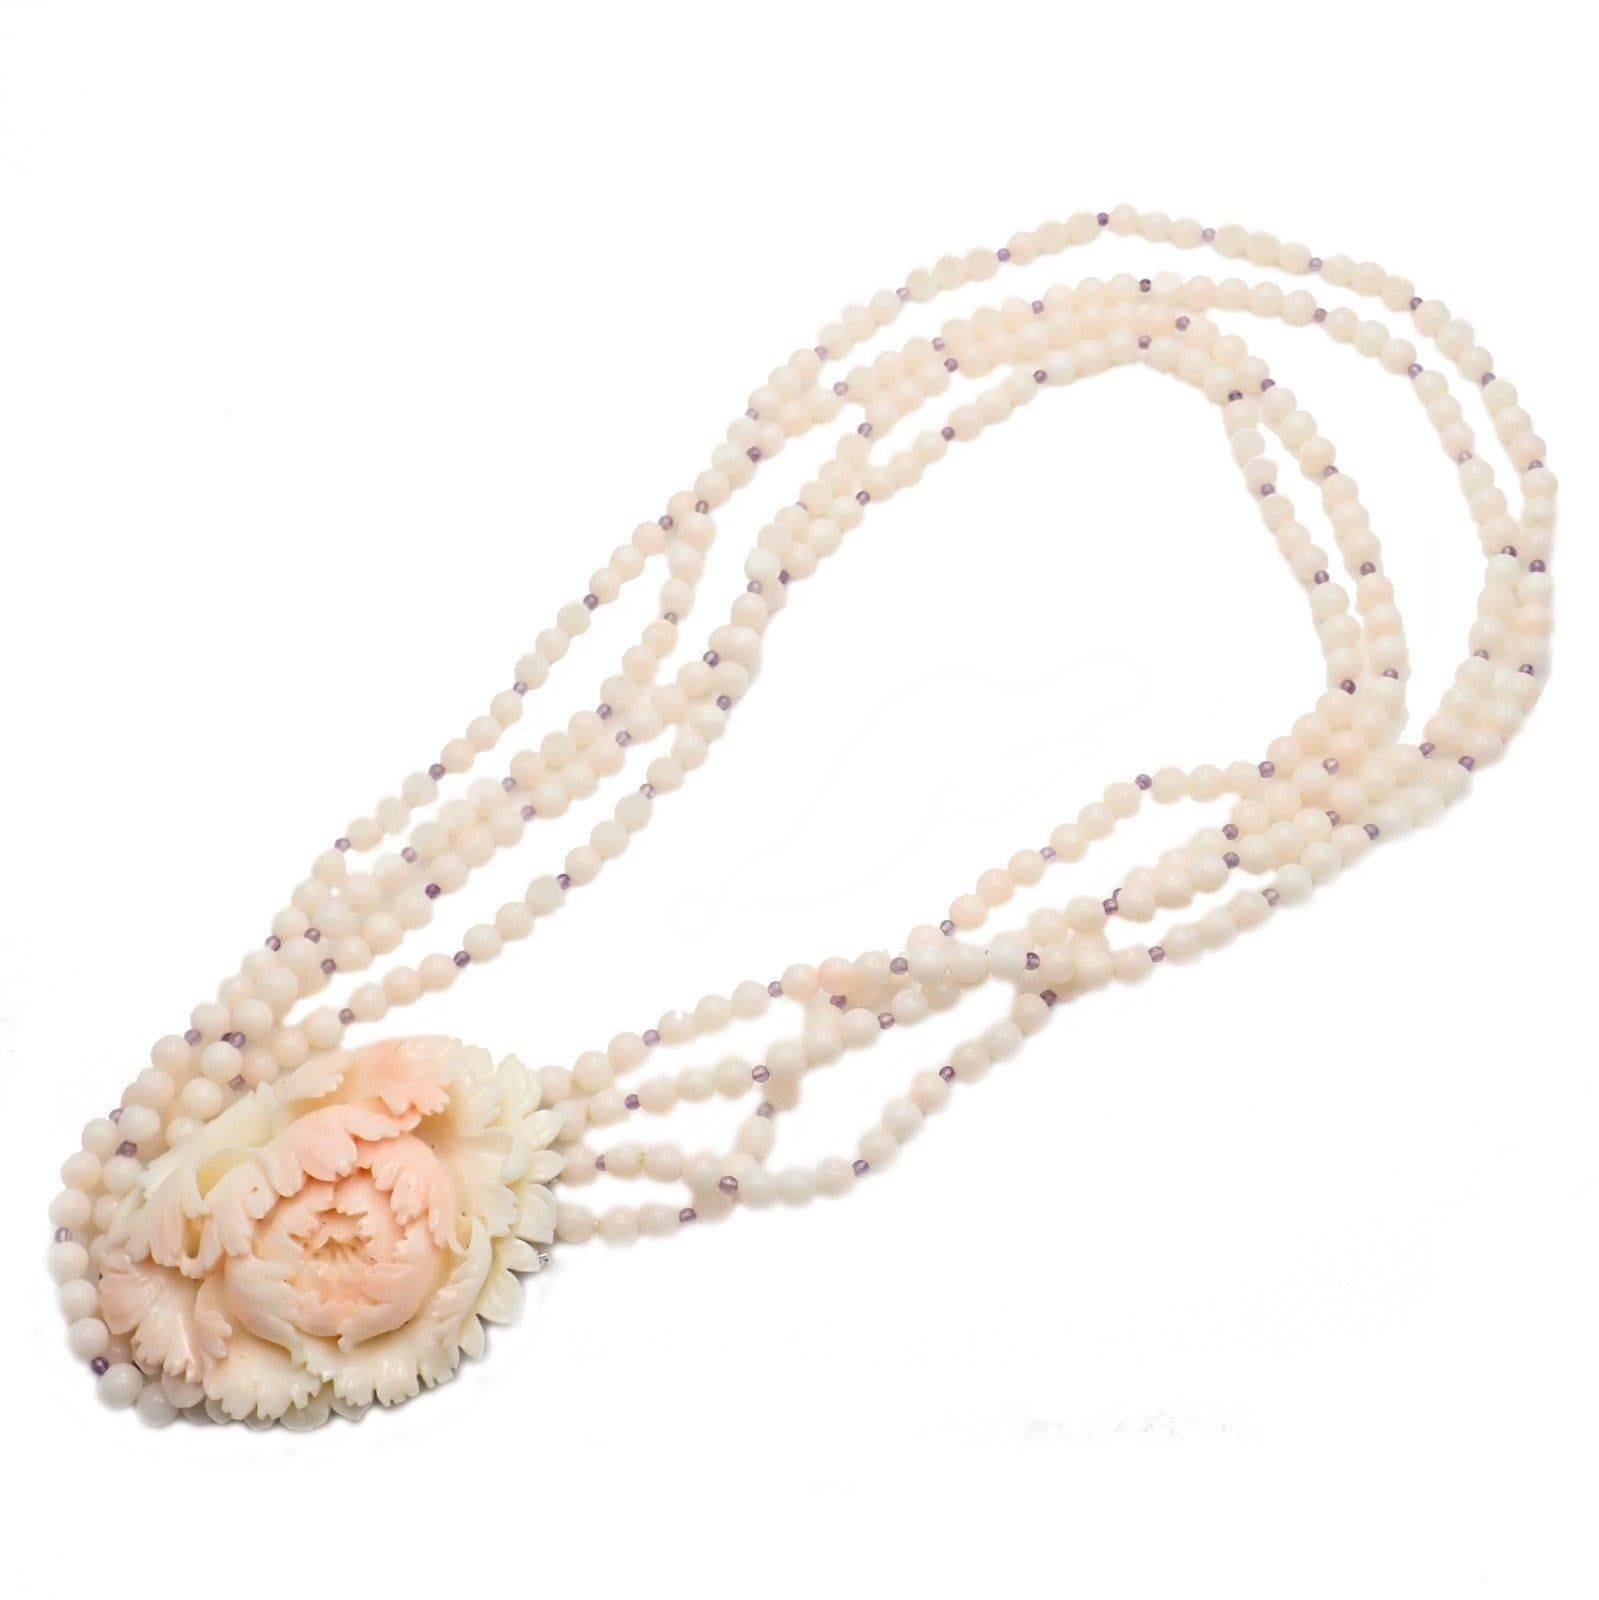 18k White Gold Carved Angel Skin Coral Amethyst Gold Necklace by Carvin French. 
With Round Angel Skin Coral Beads: 5mm
Hand Carved Angel Skin Coral Pendant: 42mm x 57mm
Amethyst Beads: 1mm
Details: 
Length: 18